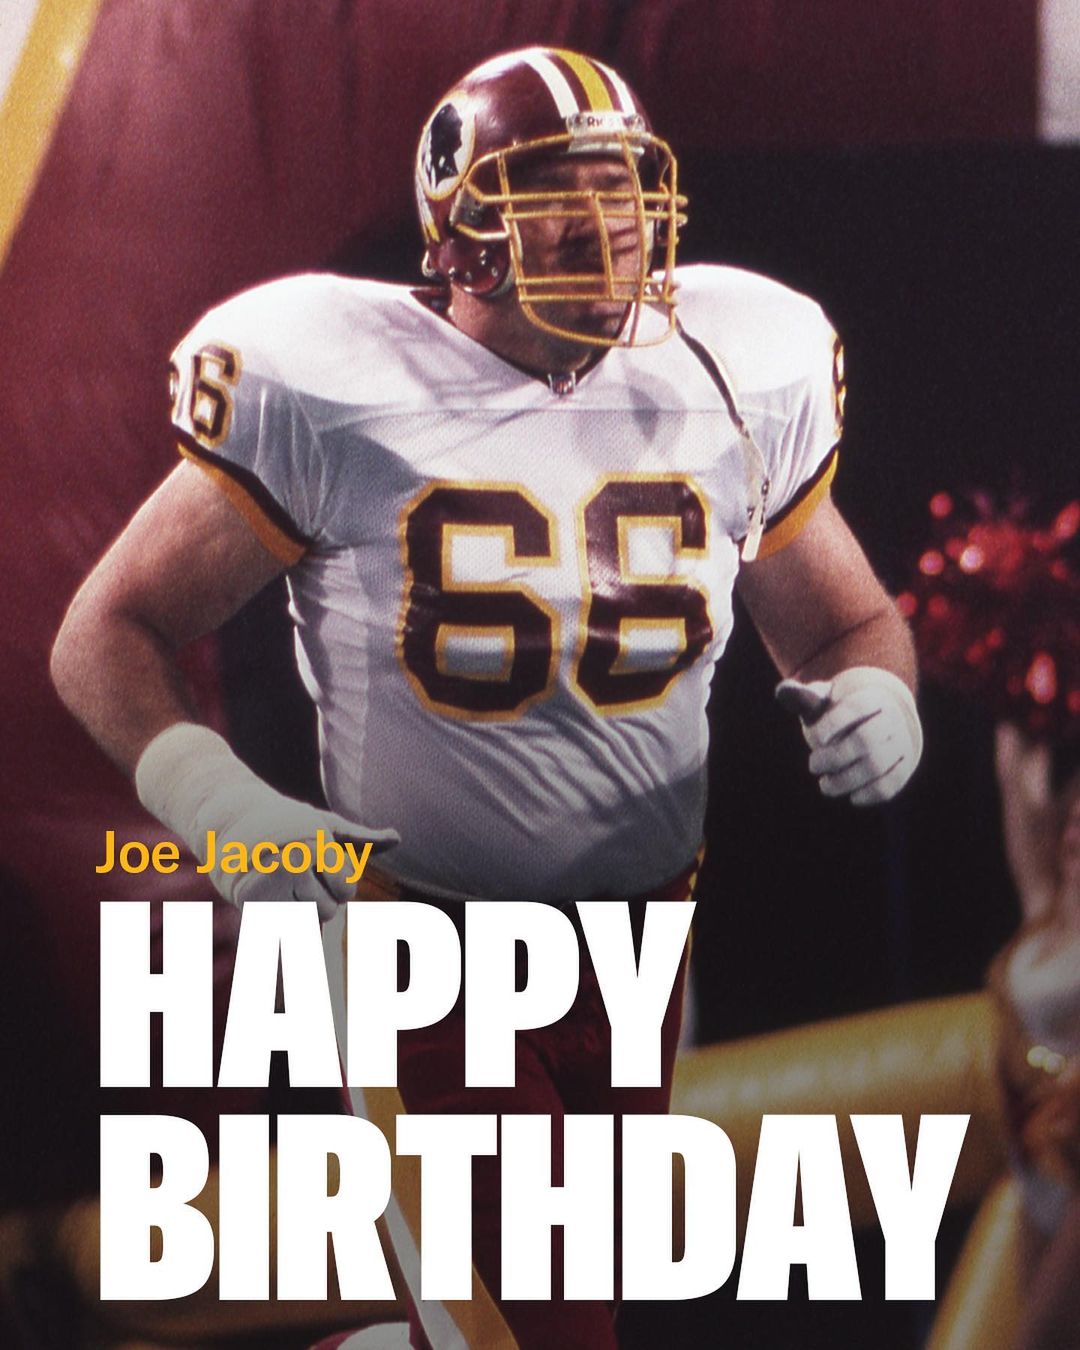 Happy birthday to one of the greatest offensive linemen EVER, Joe Jacoby!...